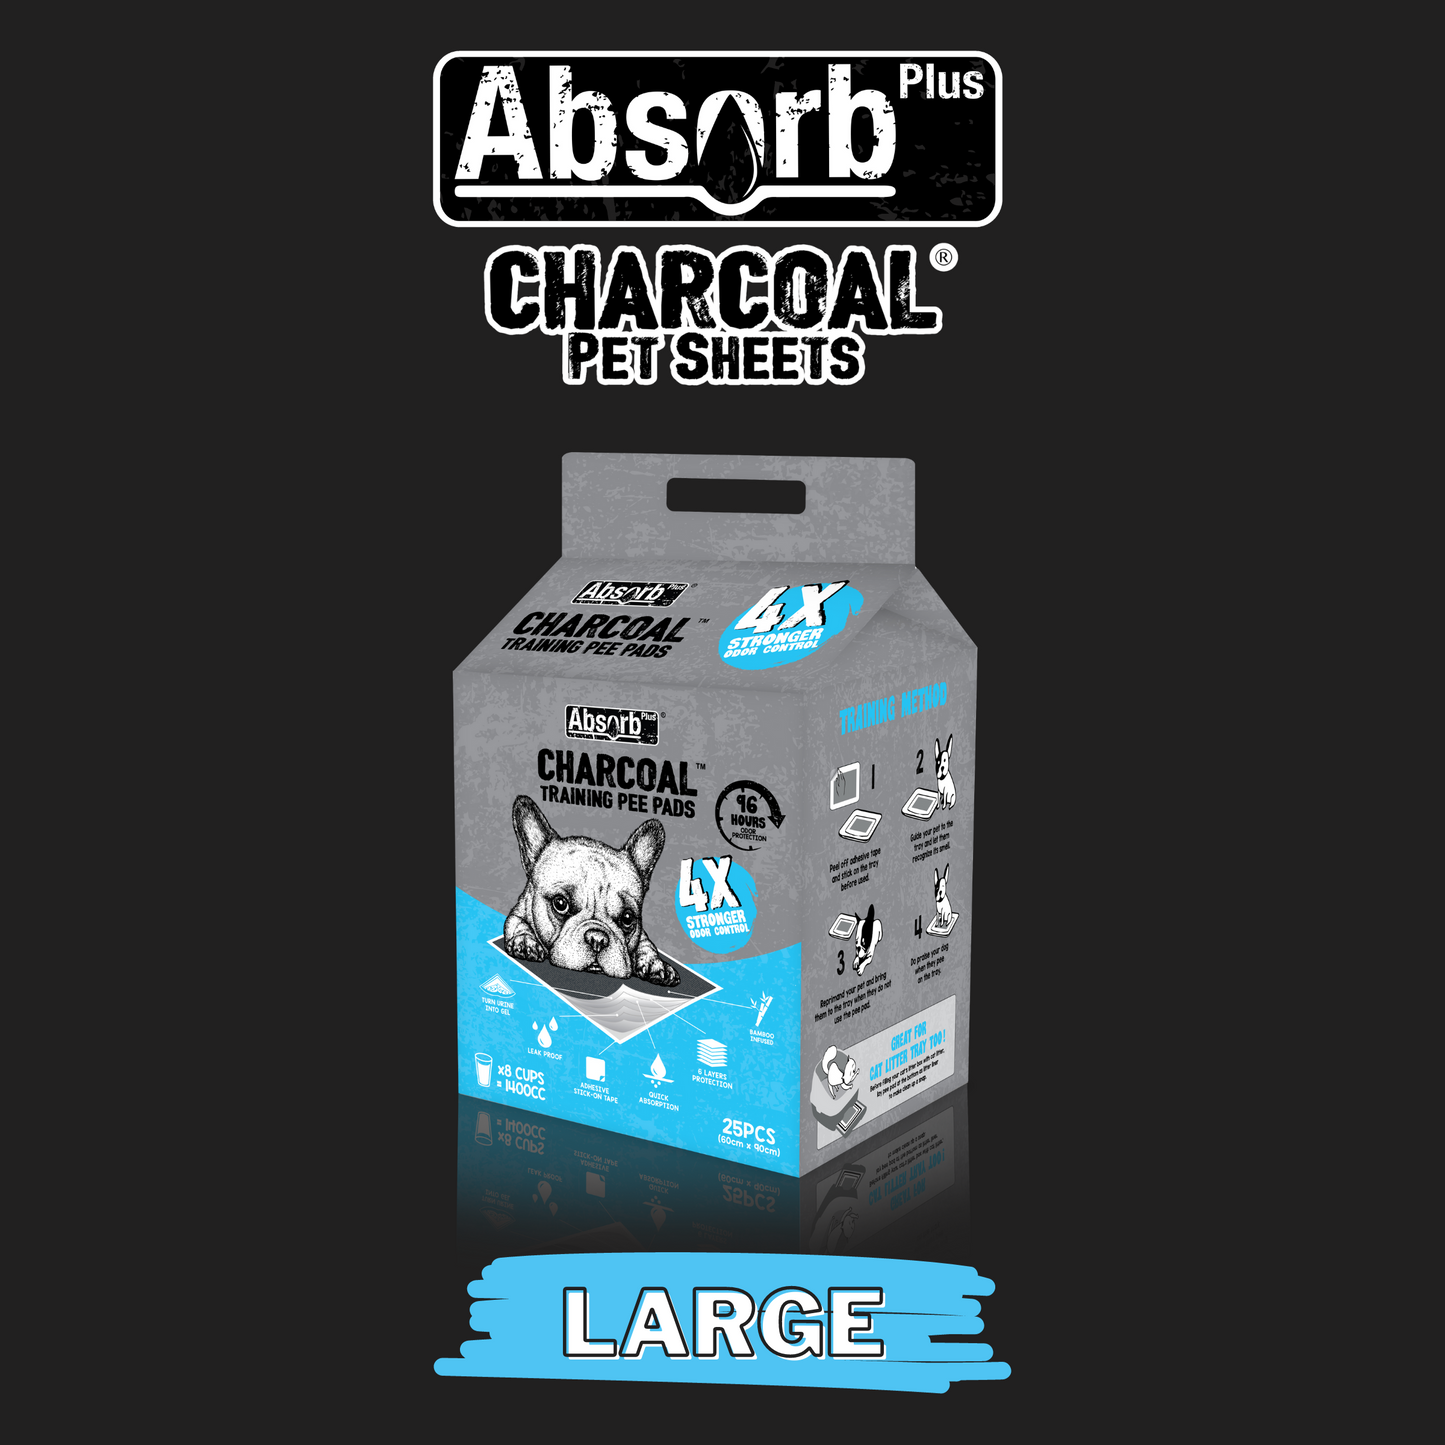 [Exclusive Bundle] Absorb Plus Charcoal Pee Pads (3 Sizes)